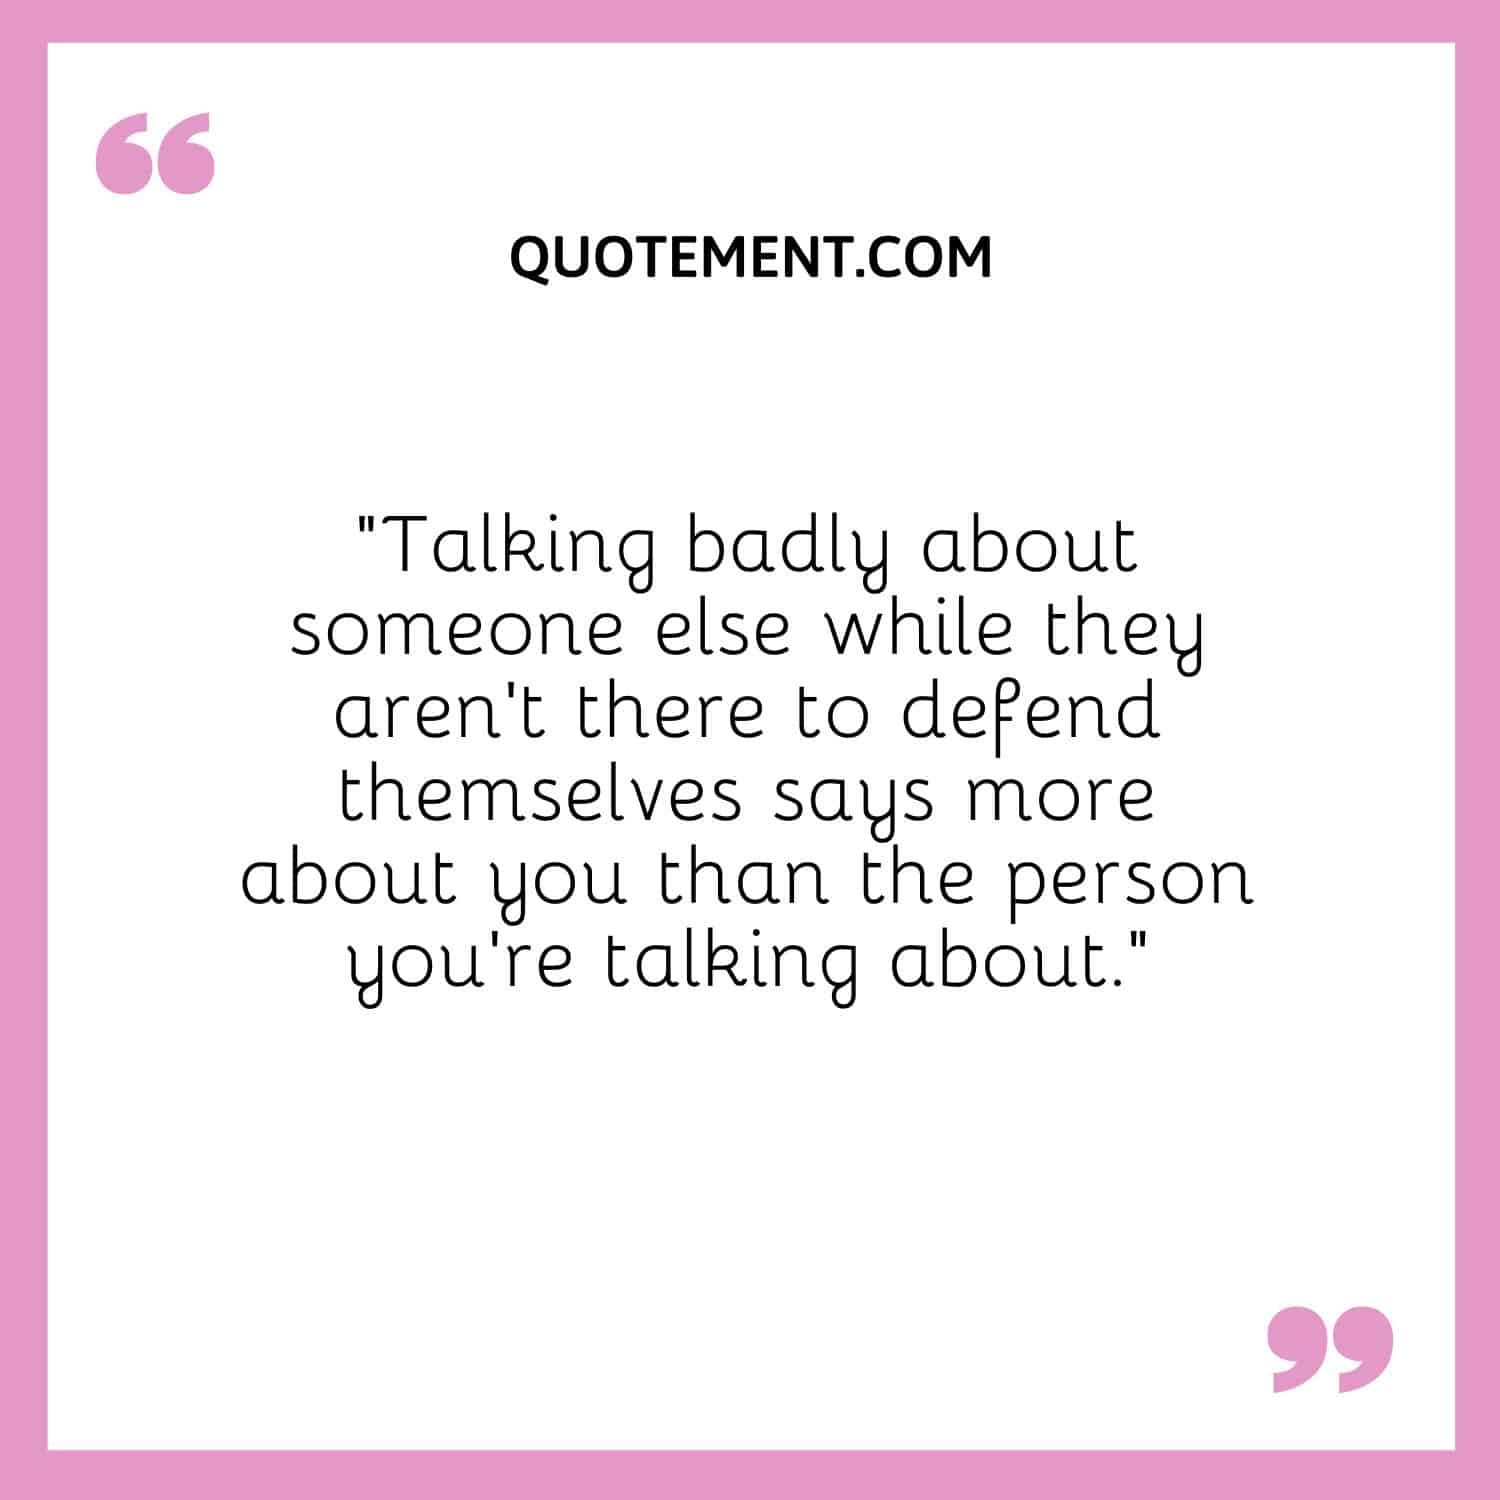 “Talking badly about someone else while they aren’t there to defend themselves says more about you than the person you’re talking about.”